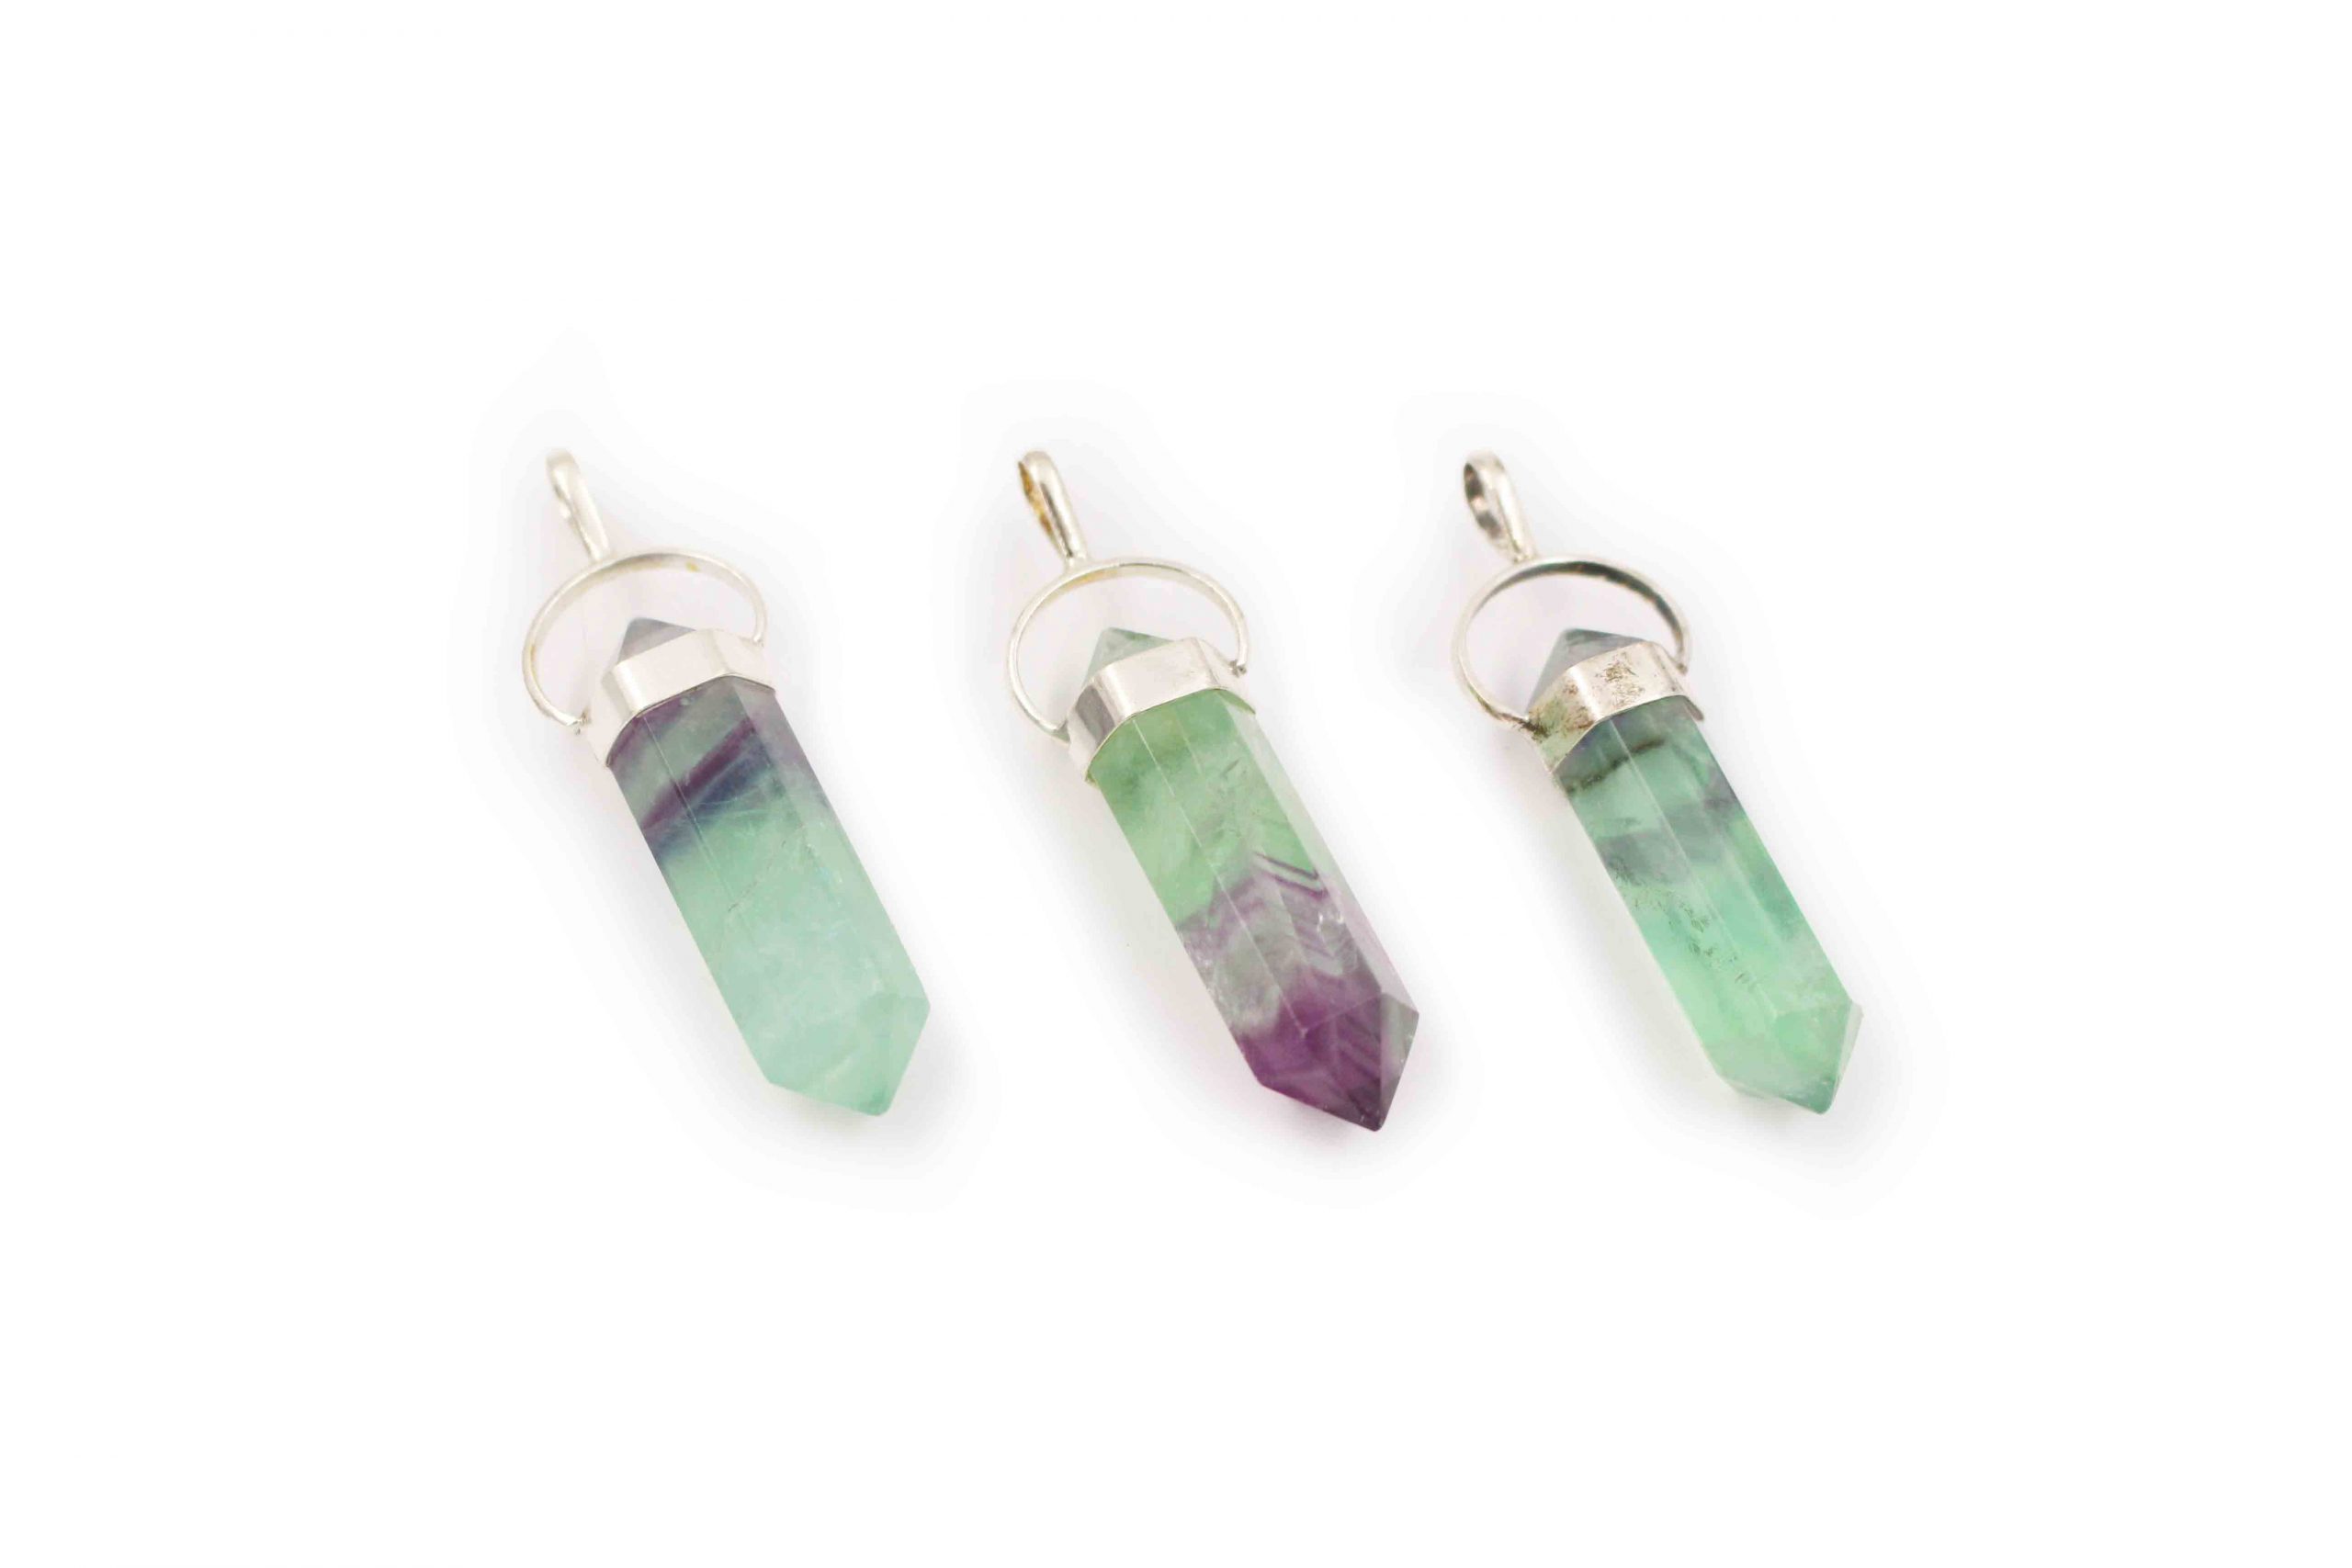 Details about   925 Sterling Silver Elegant Pendant with a Rainbow Fluorite Cabochon Necklace 